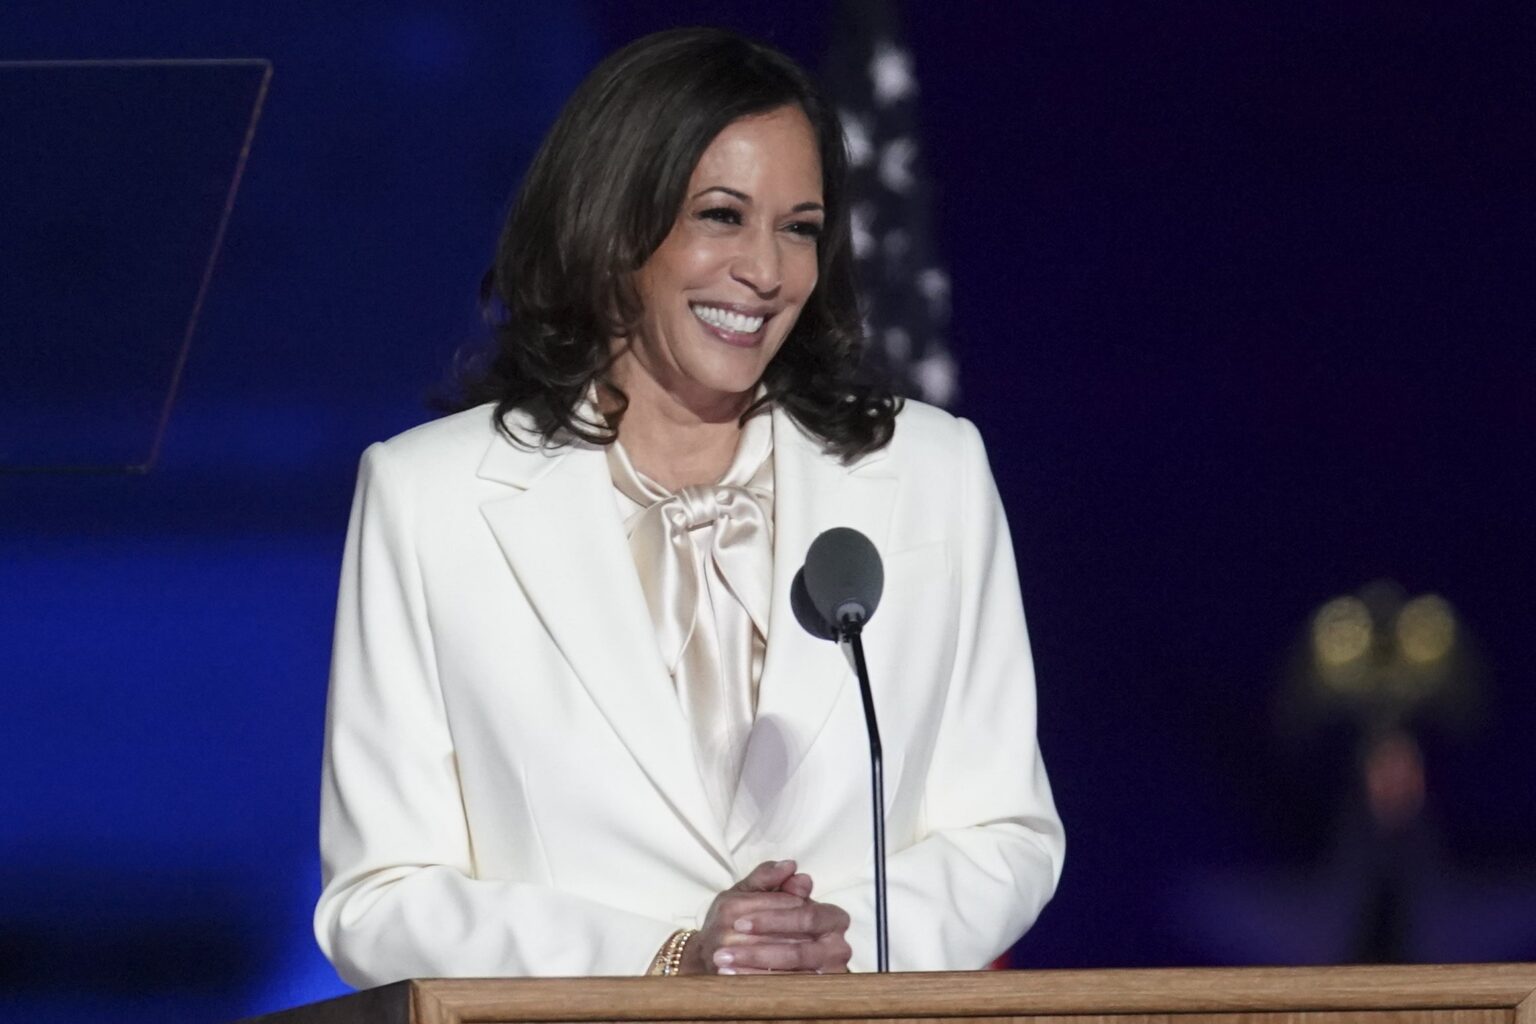 Kamala Harris is now the first female Vice President of the United States. Check out some of the best memes of the new VP as she is welcomed into office.